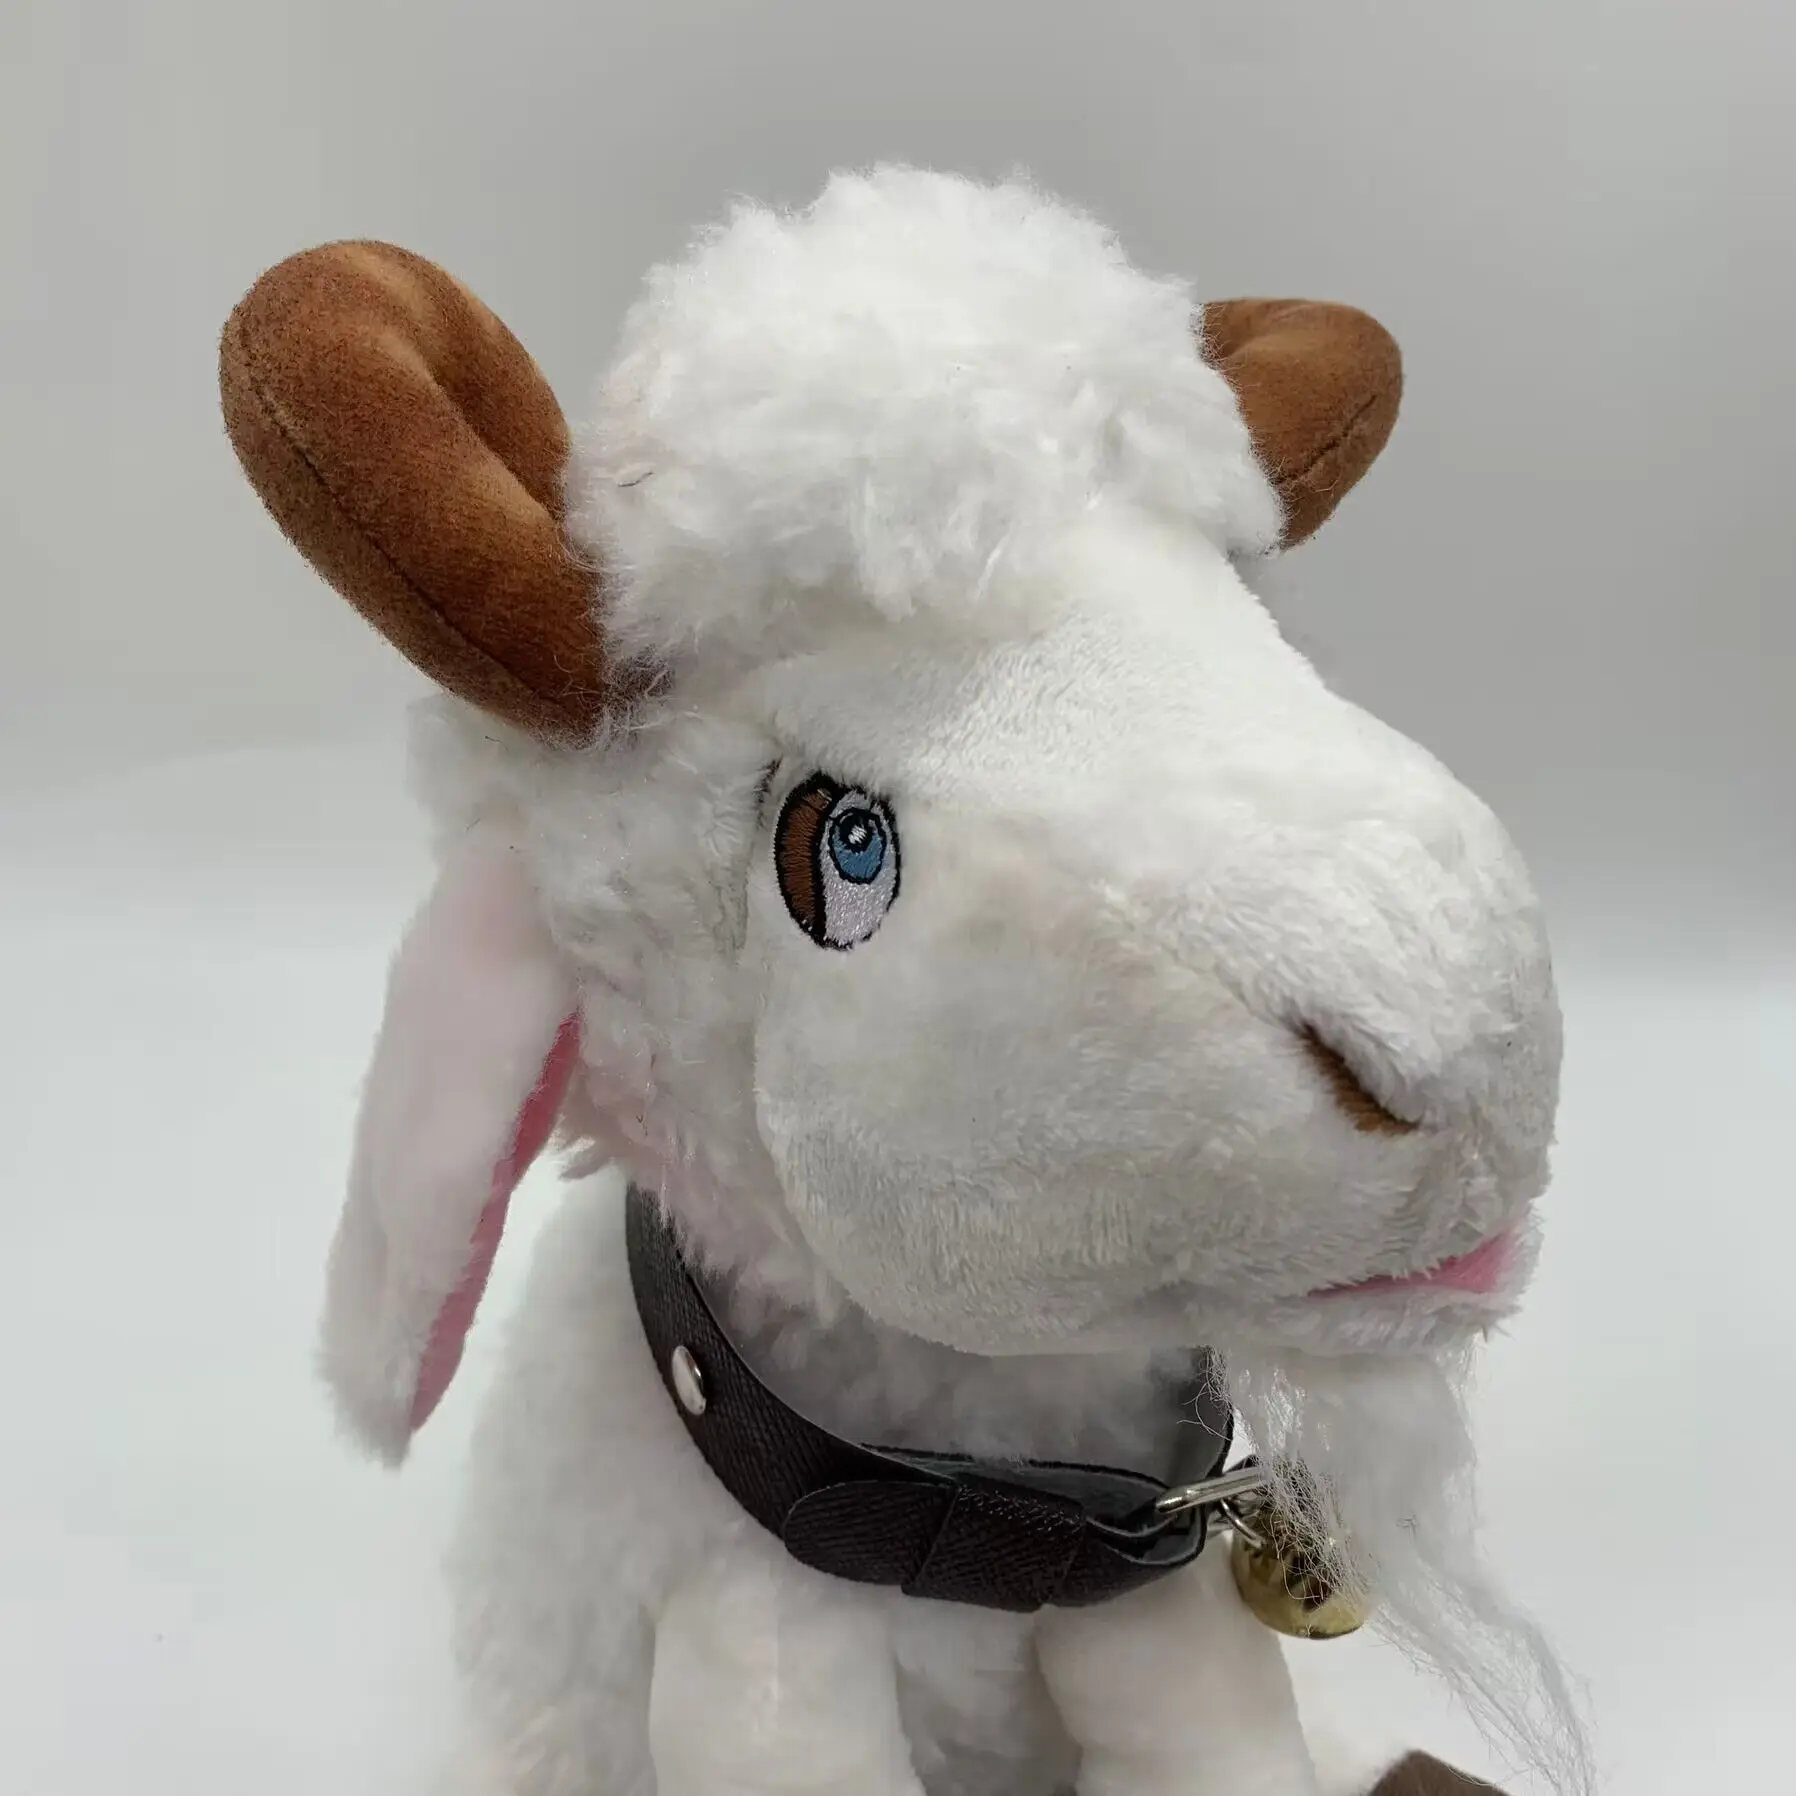 Wholesale Plush Toys Electric Sheep Singing Russian Songs Dancing Swinging Goats Children's Gifts